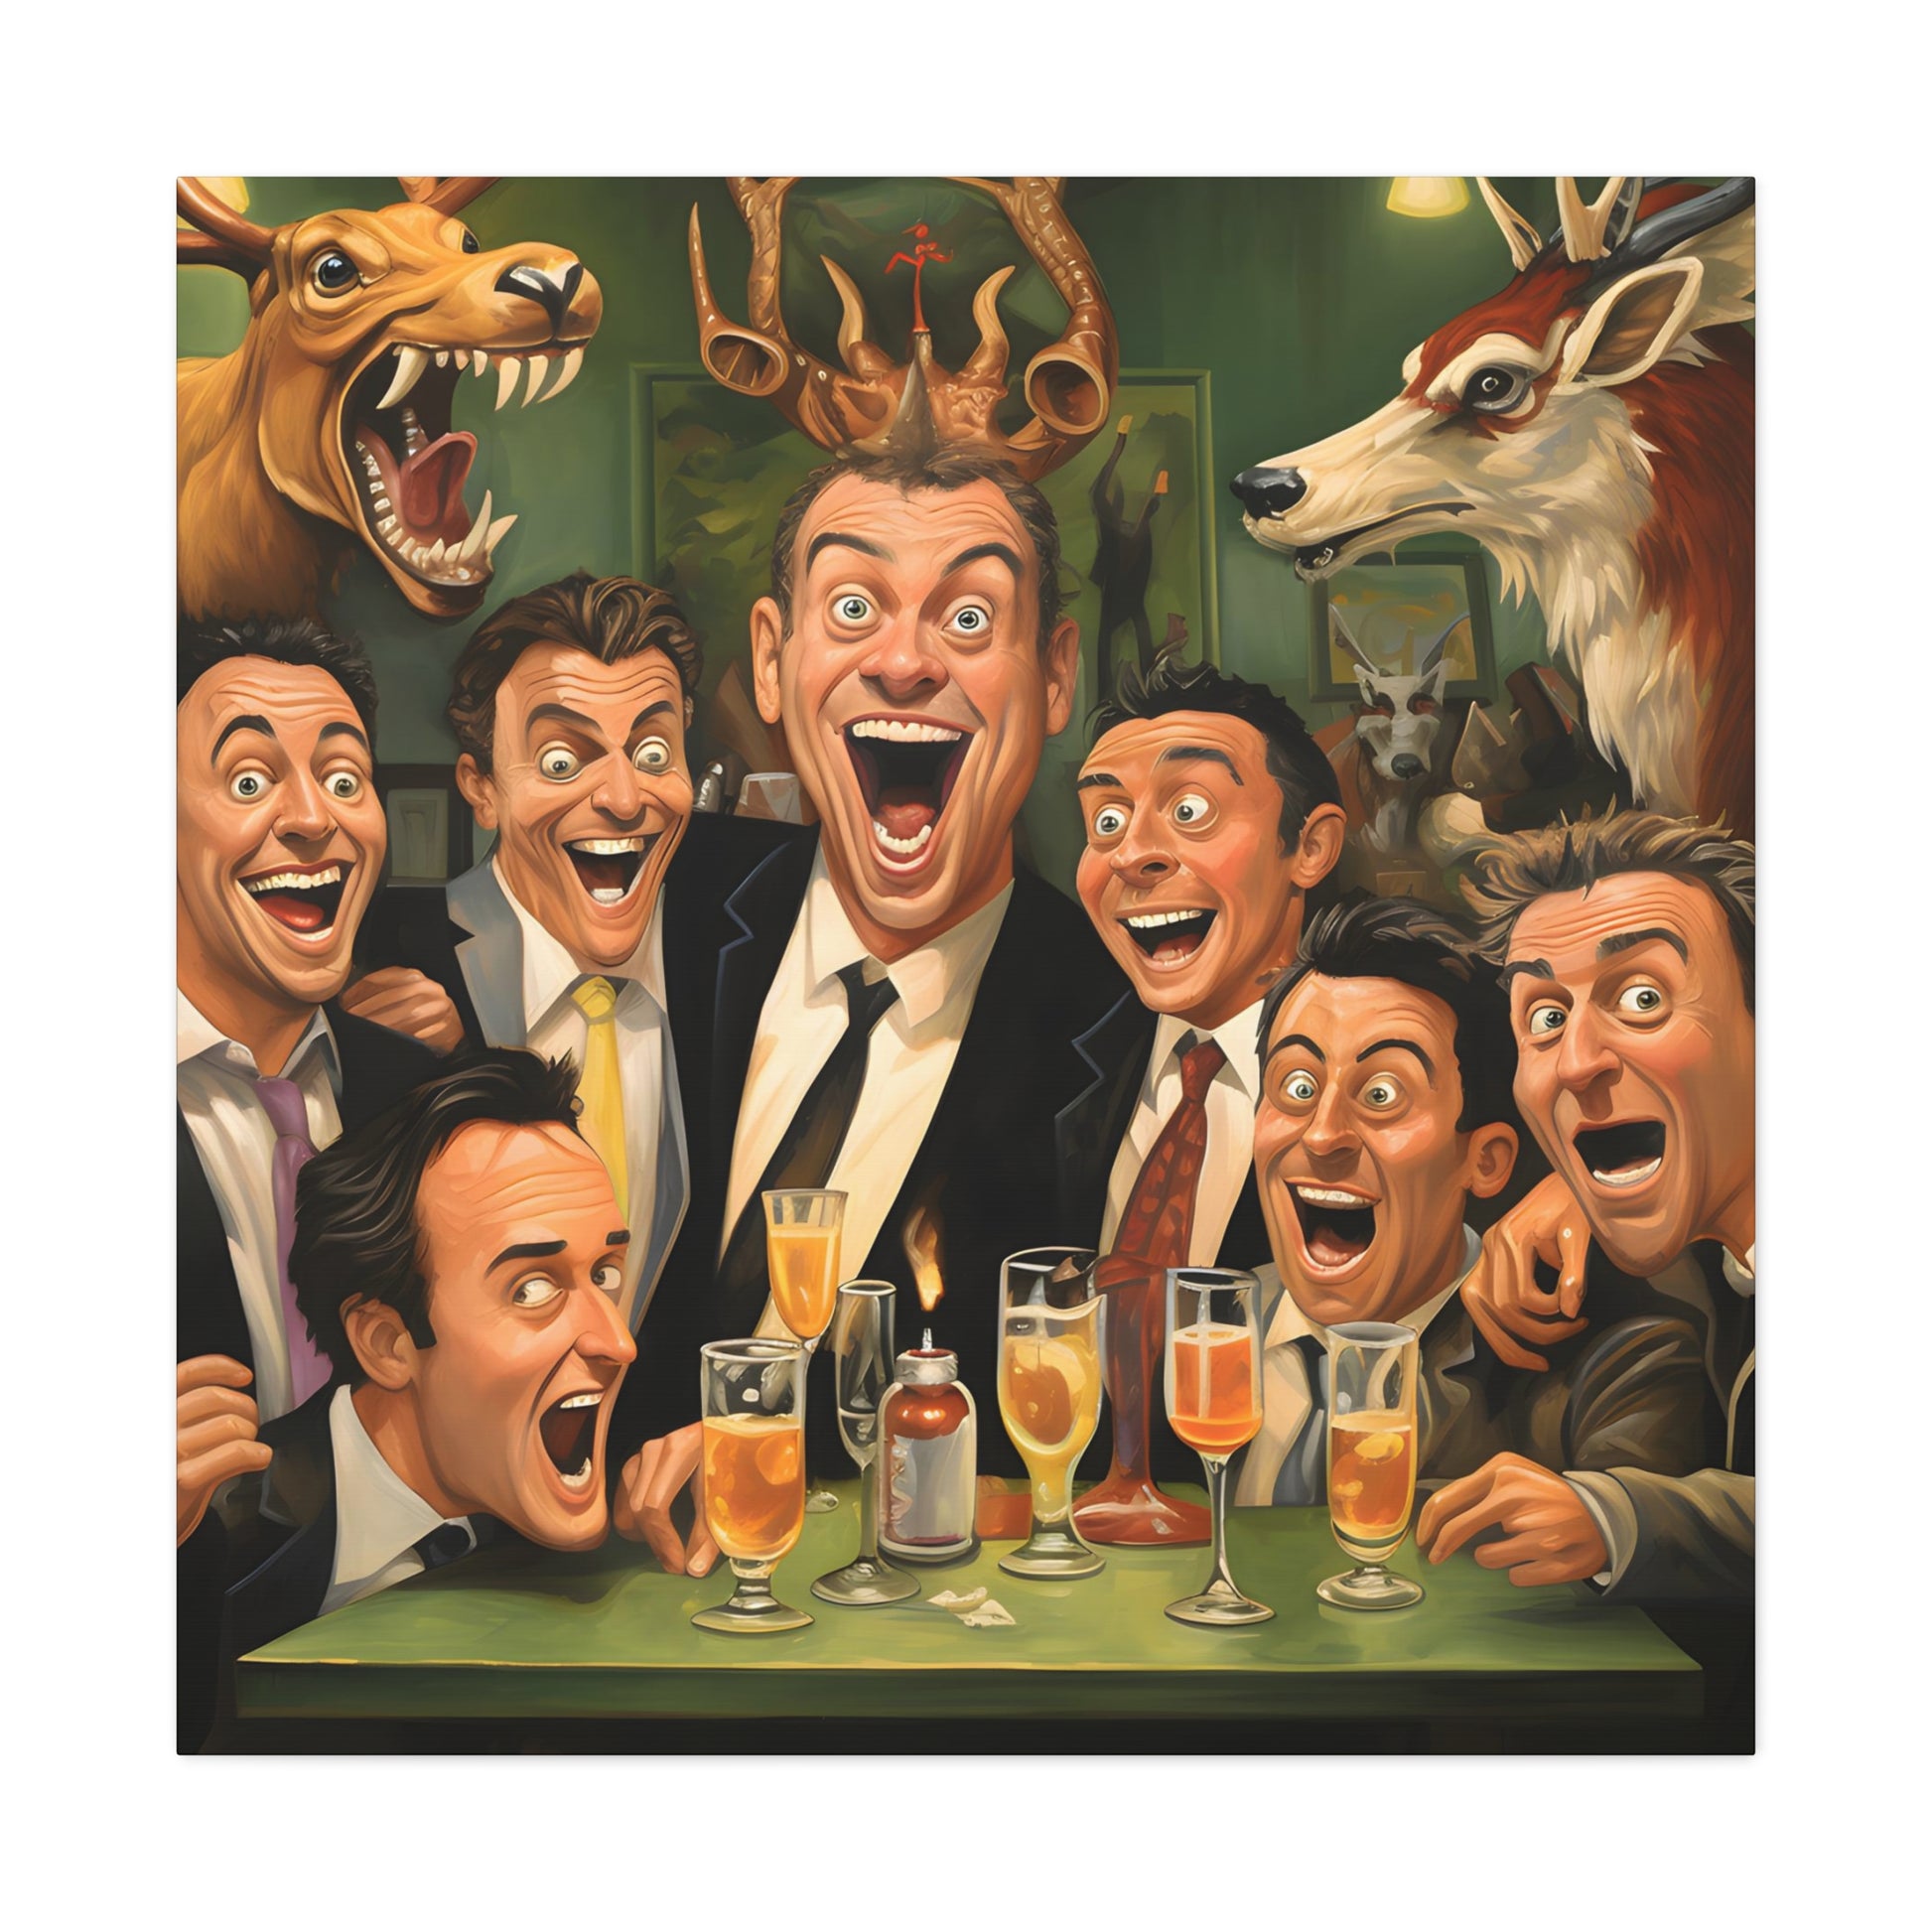 image 4 Cheers to the Groom: A Wild Night's Tale' by Archie Goodwin, a jubilant portrayal of a stag night full of laughter and camaraderie. The artwork features a backdrop of taxidermy and toasts, with each character's exaggerated expression telling a story of epic merriment and brotherhood